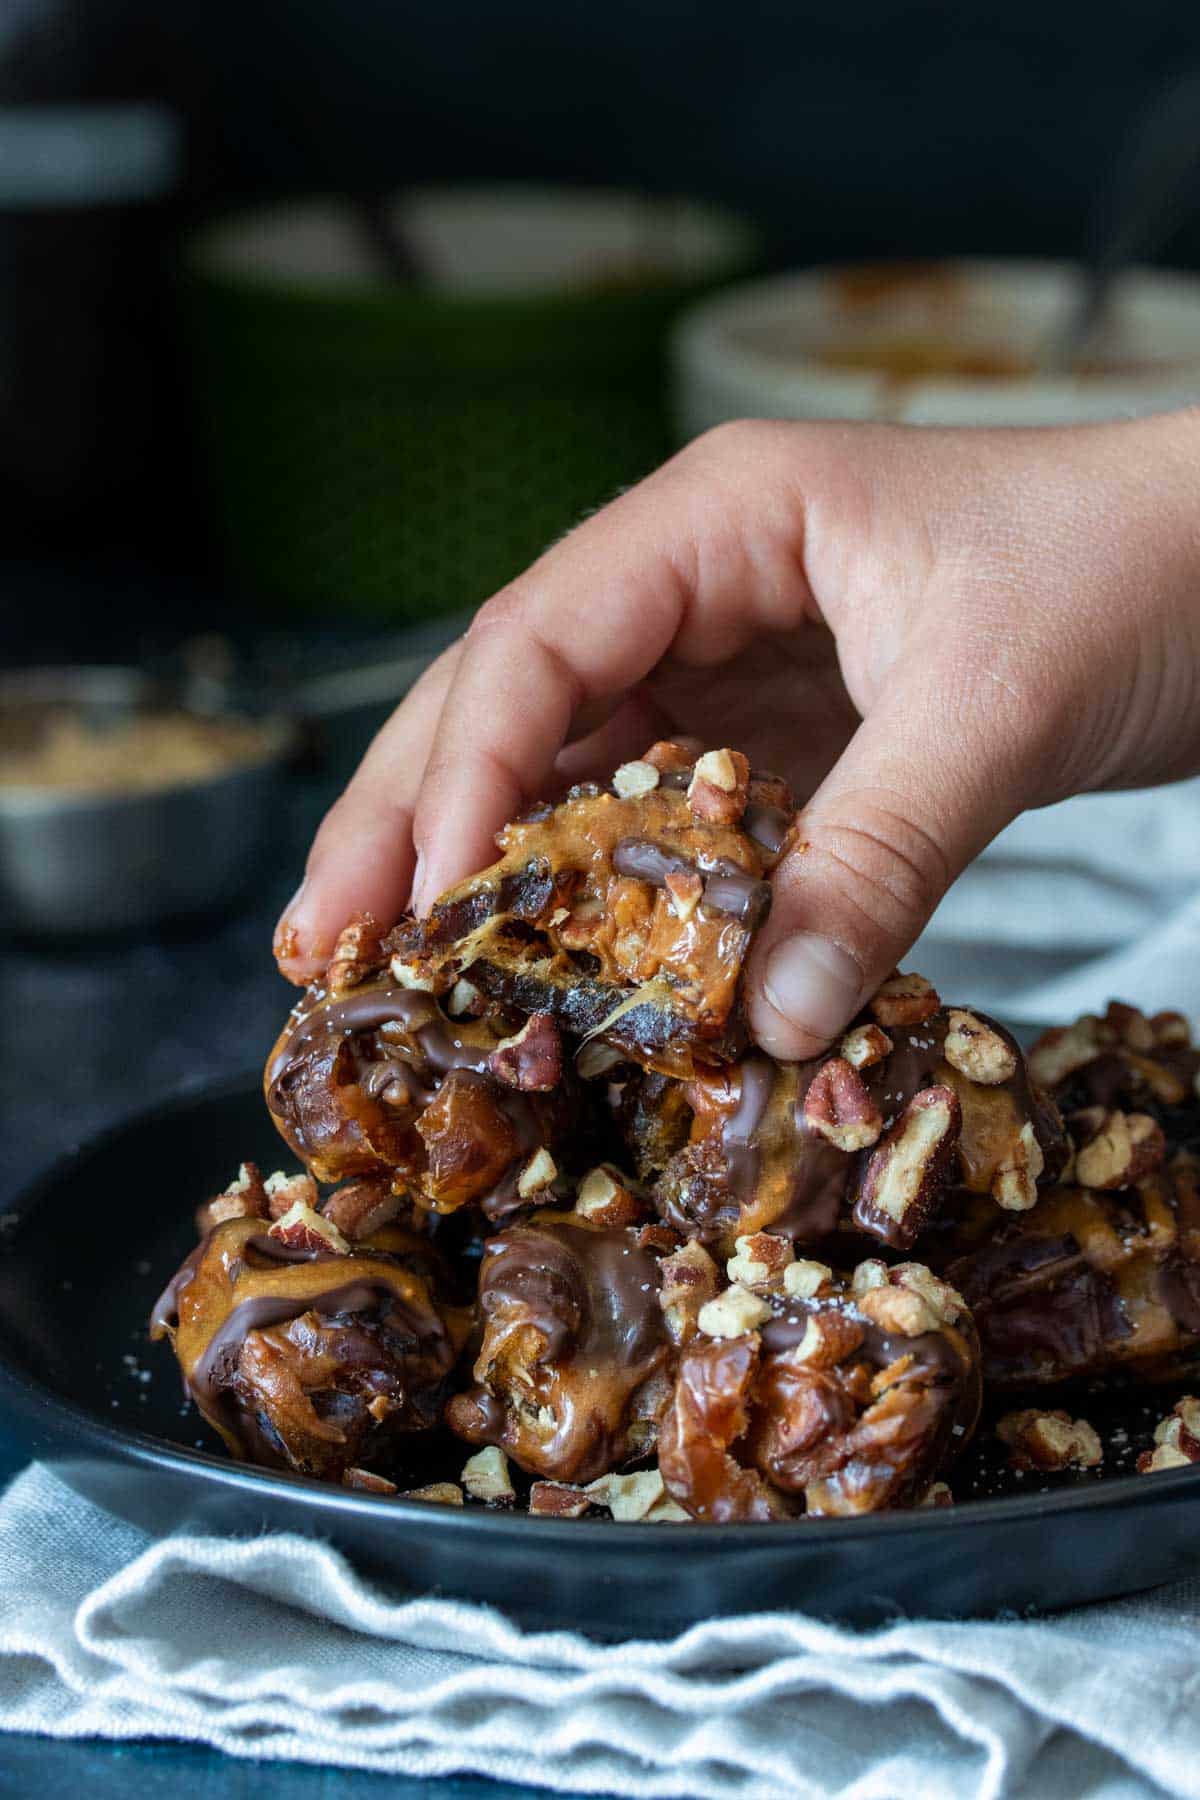 A hand grabbing a stuffed date covered in chocolate and caramel from a pile of them on a black plate